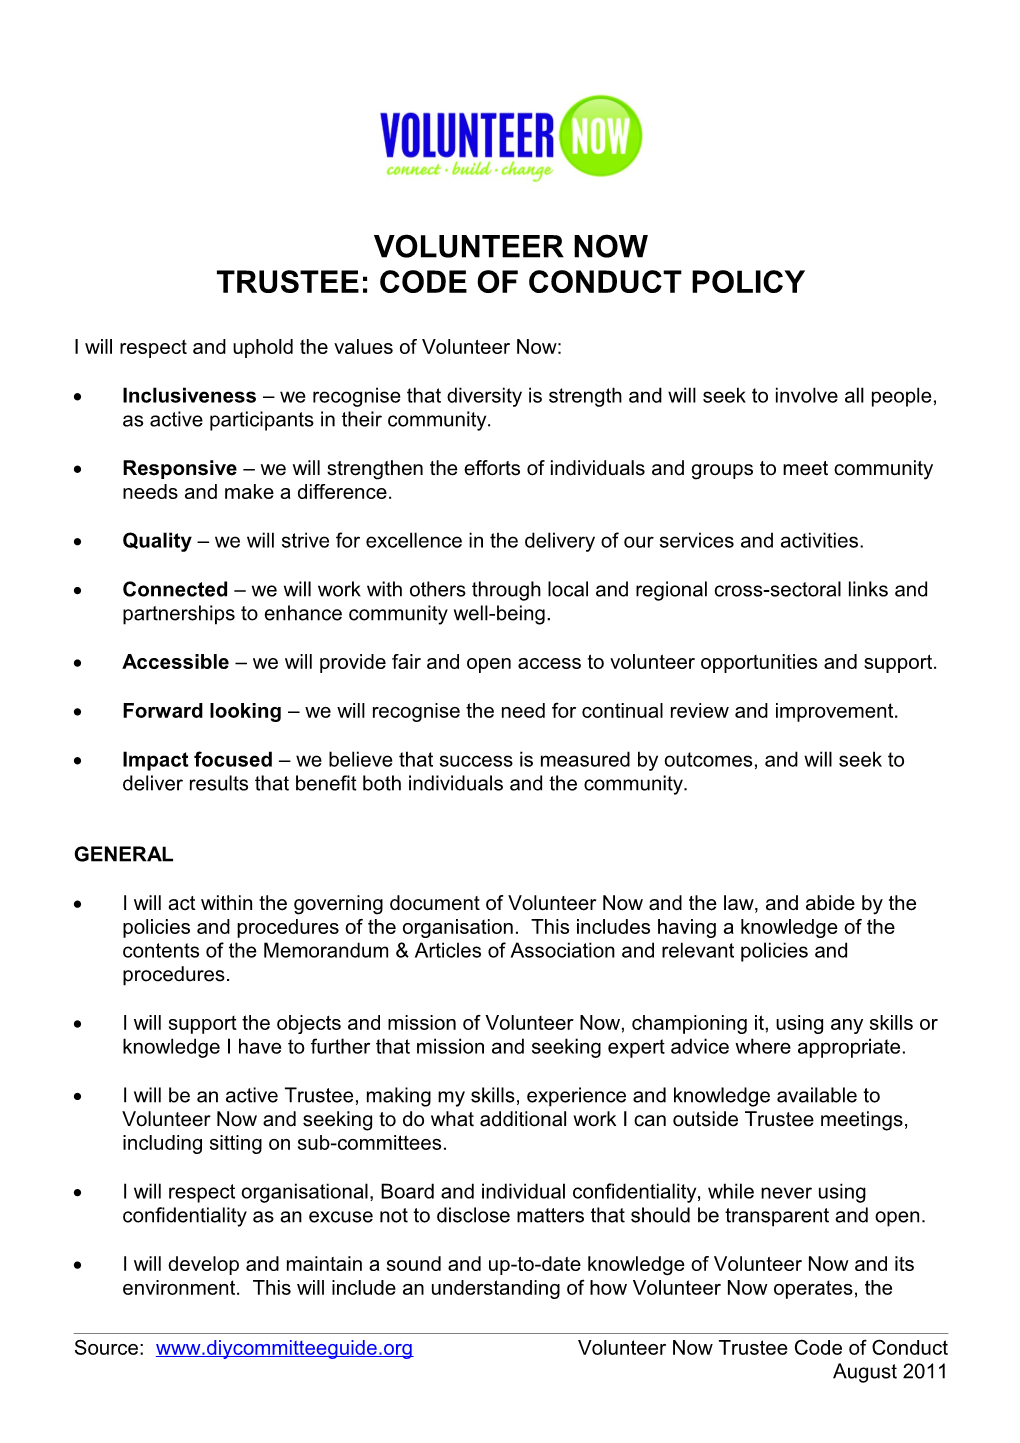 Trustee: Code of Conduct Policy